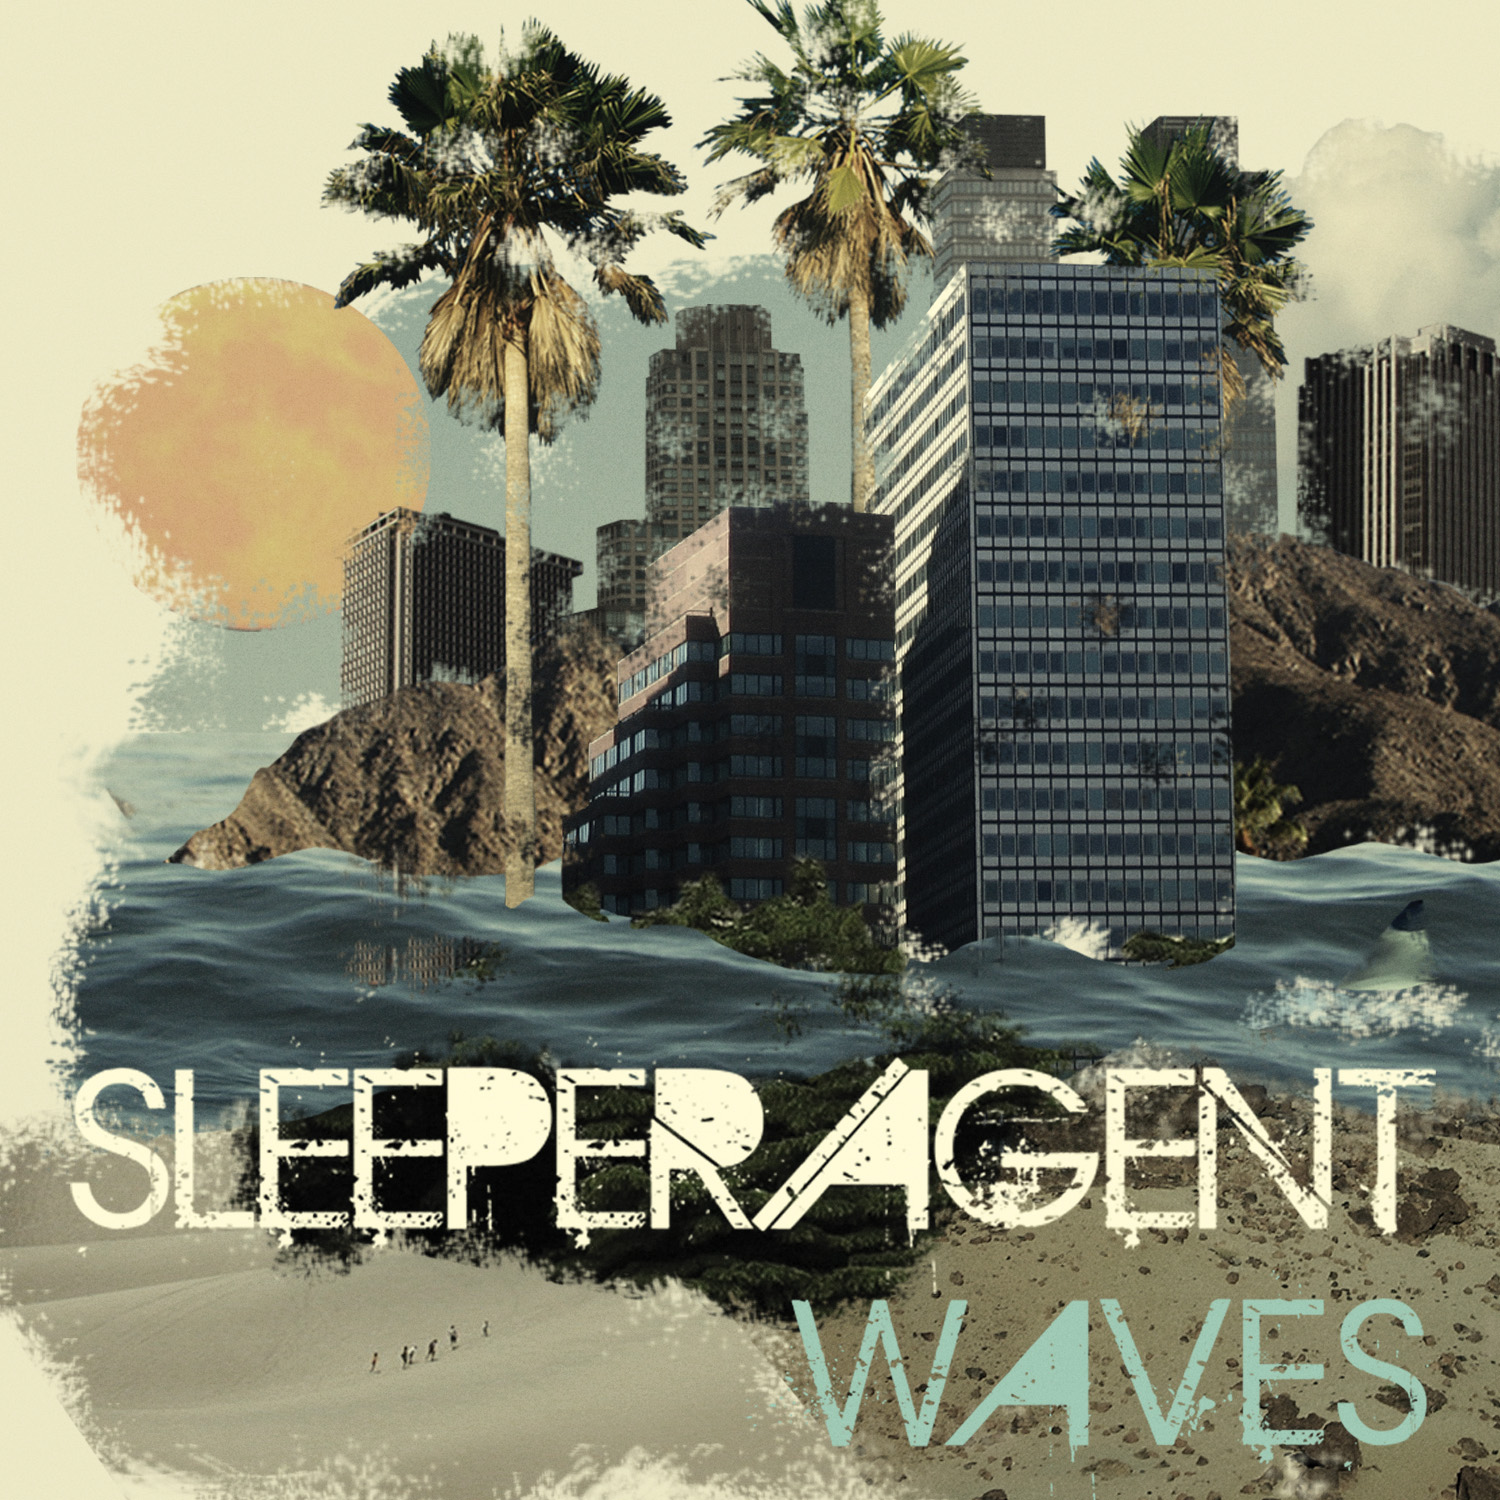 A Band That is Making "Waves"